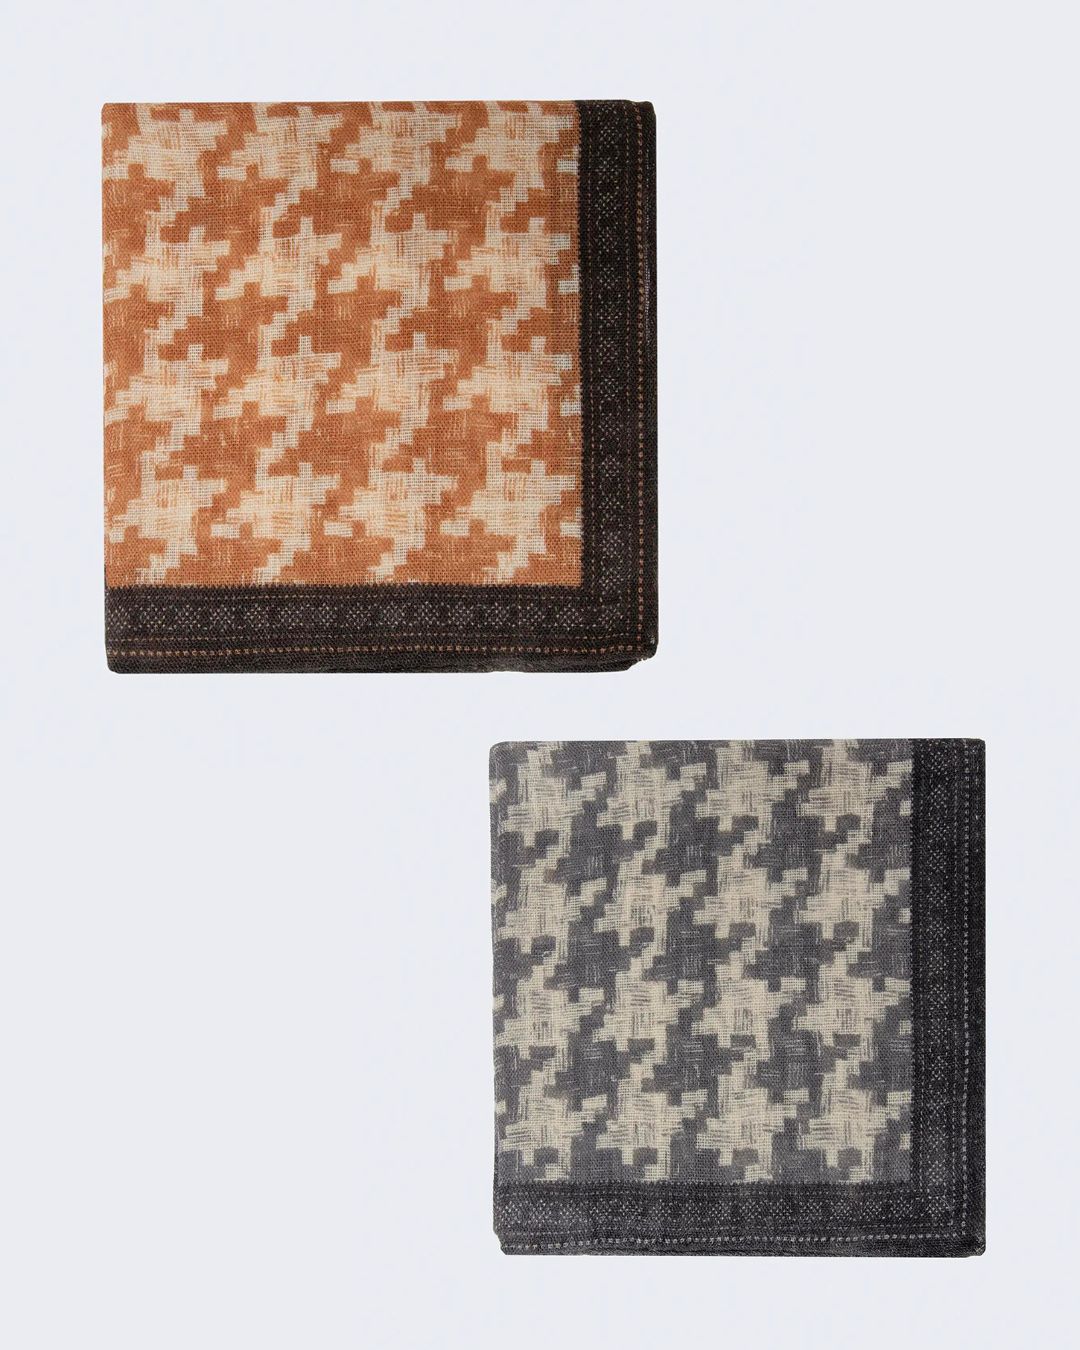 Two wool clutch bags